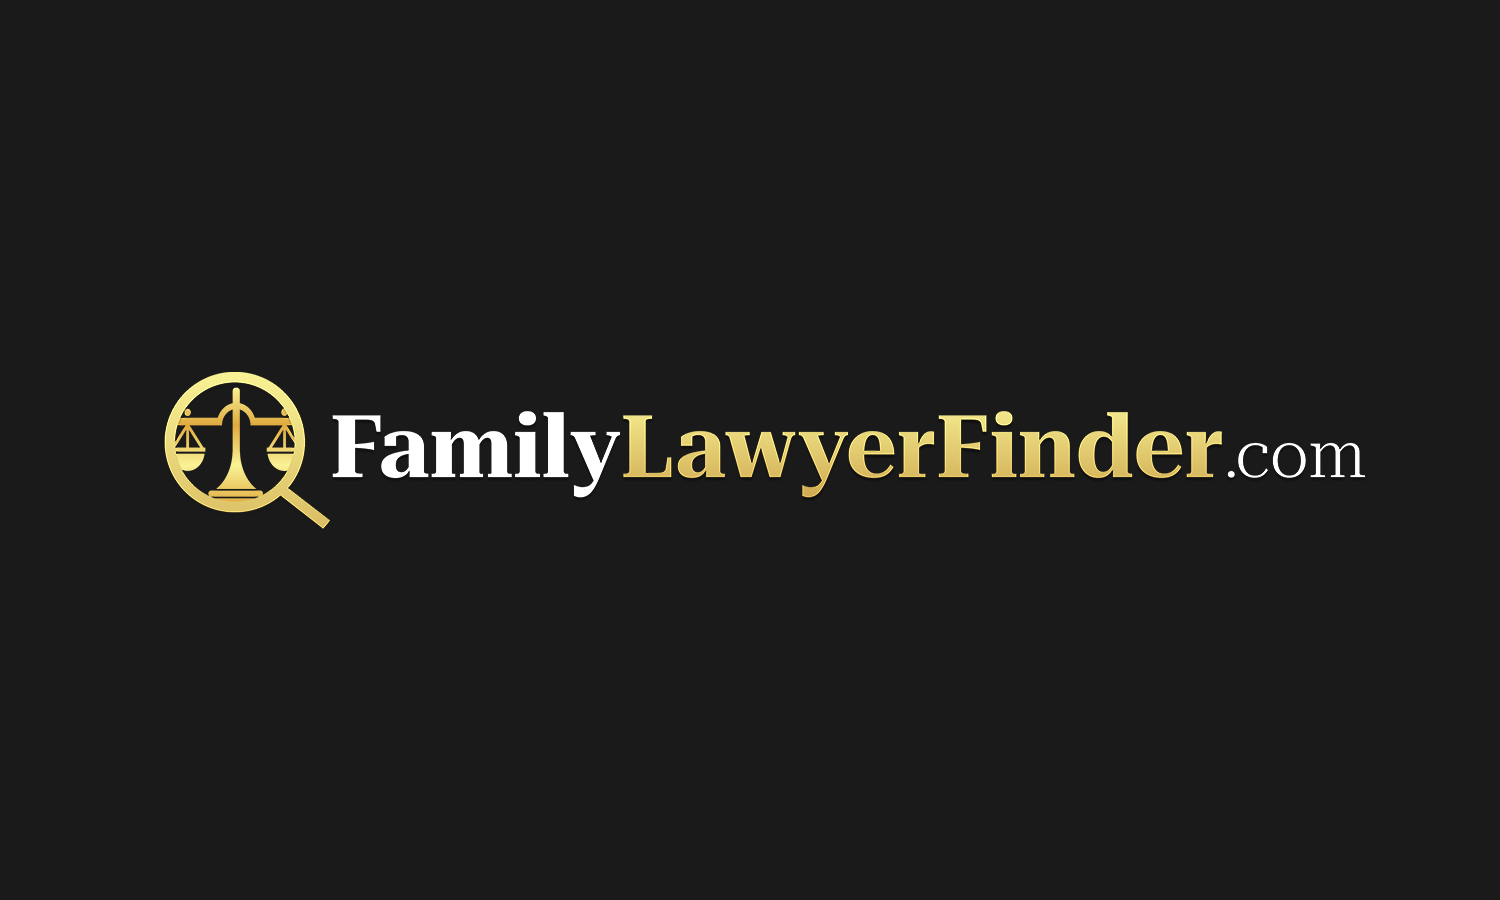 The Best 12 Family Lawyers In San Jose (Updated 2023) | ⚖️ Top Rated Family Solicitors by Family Lawyer Finder San Jose ™